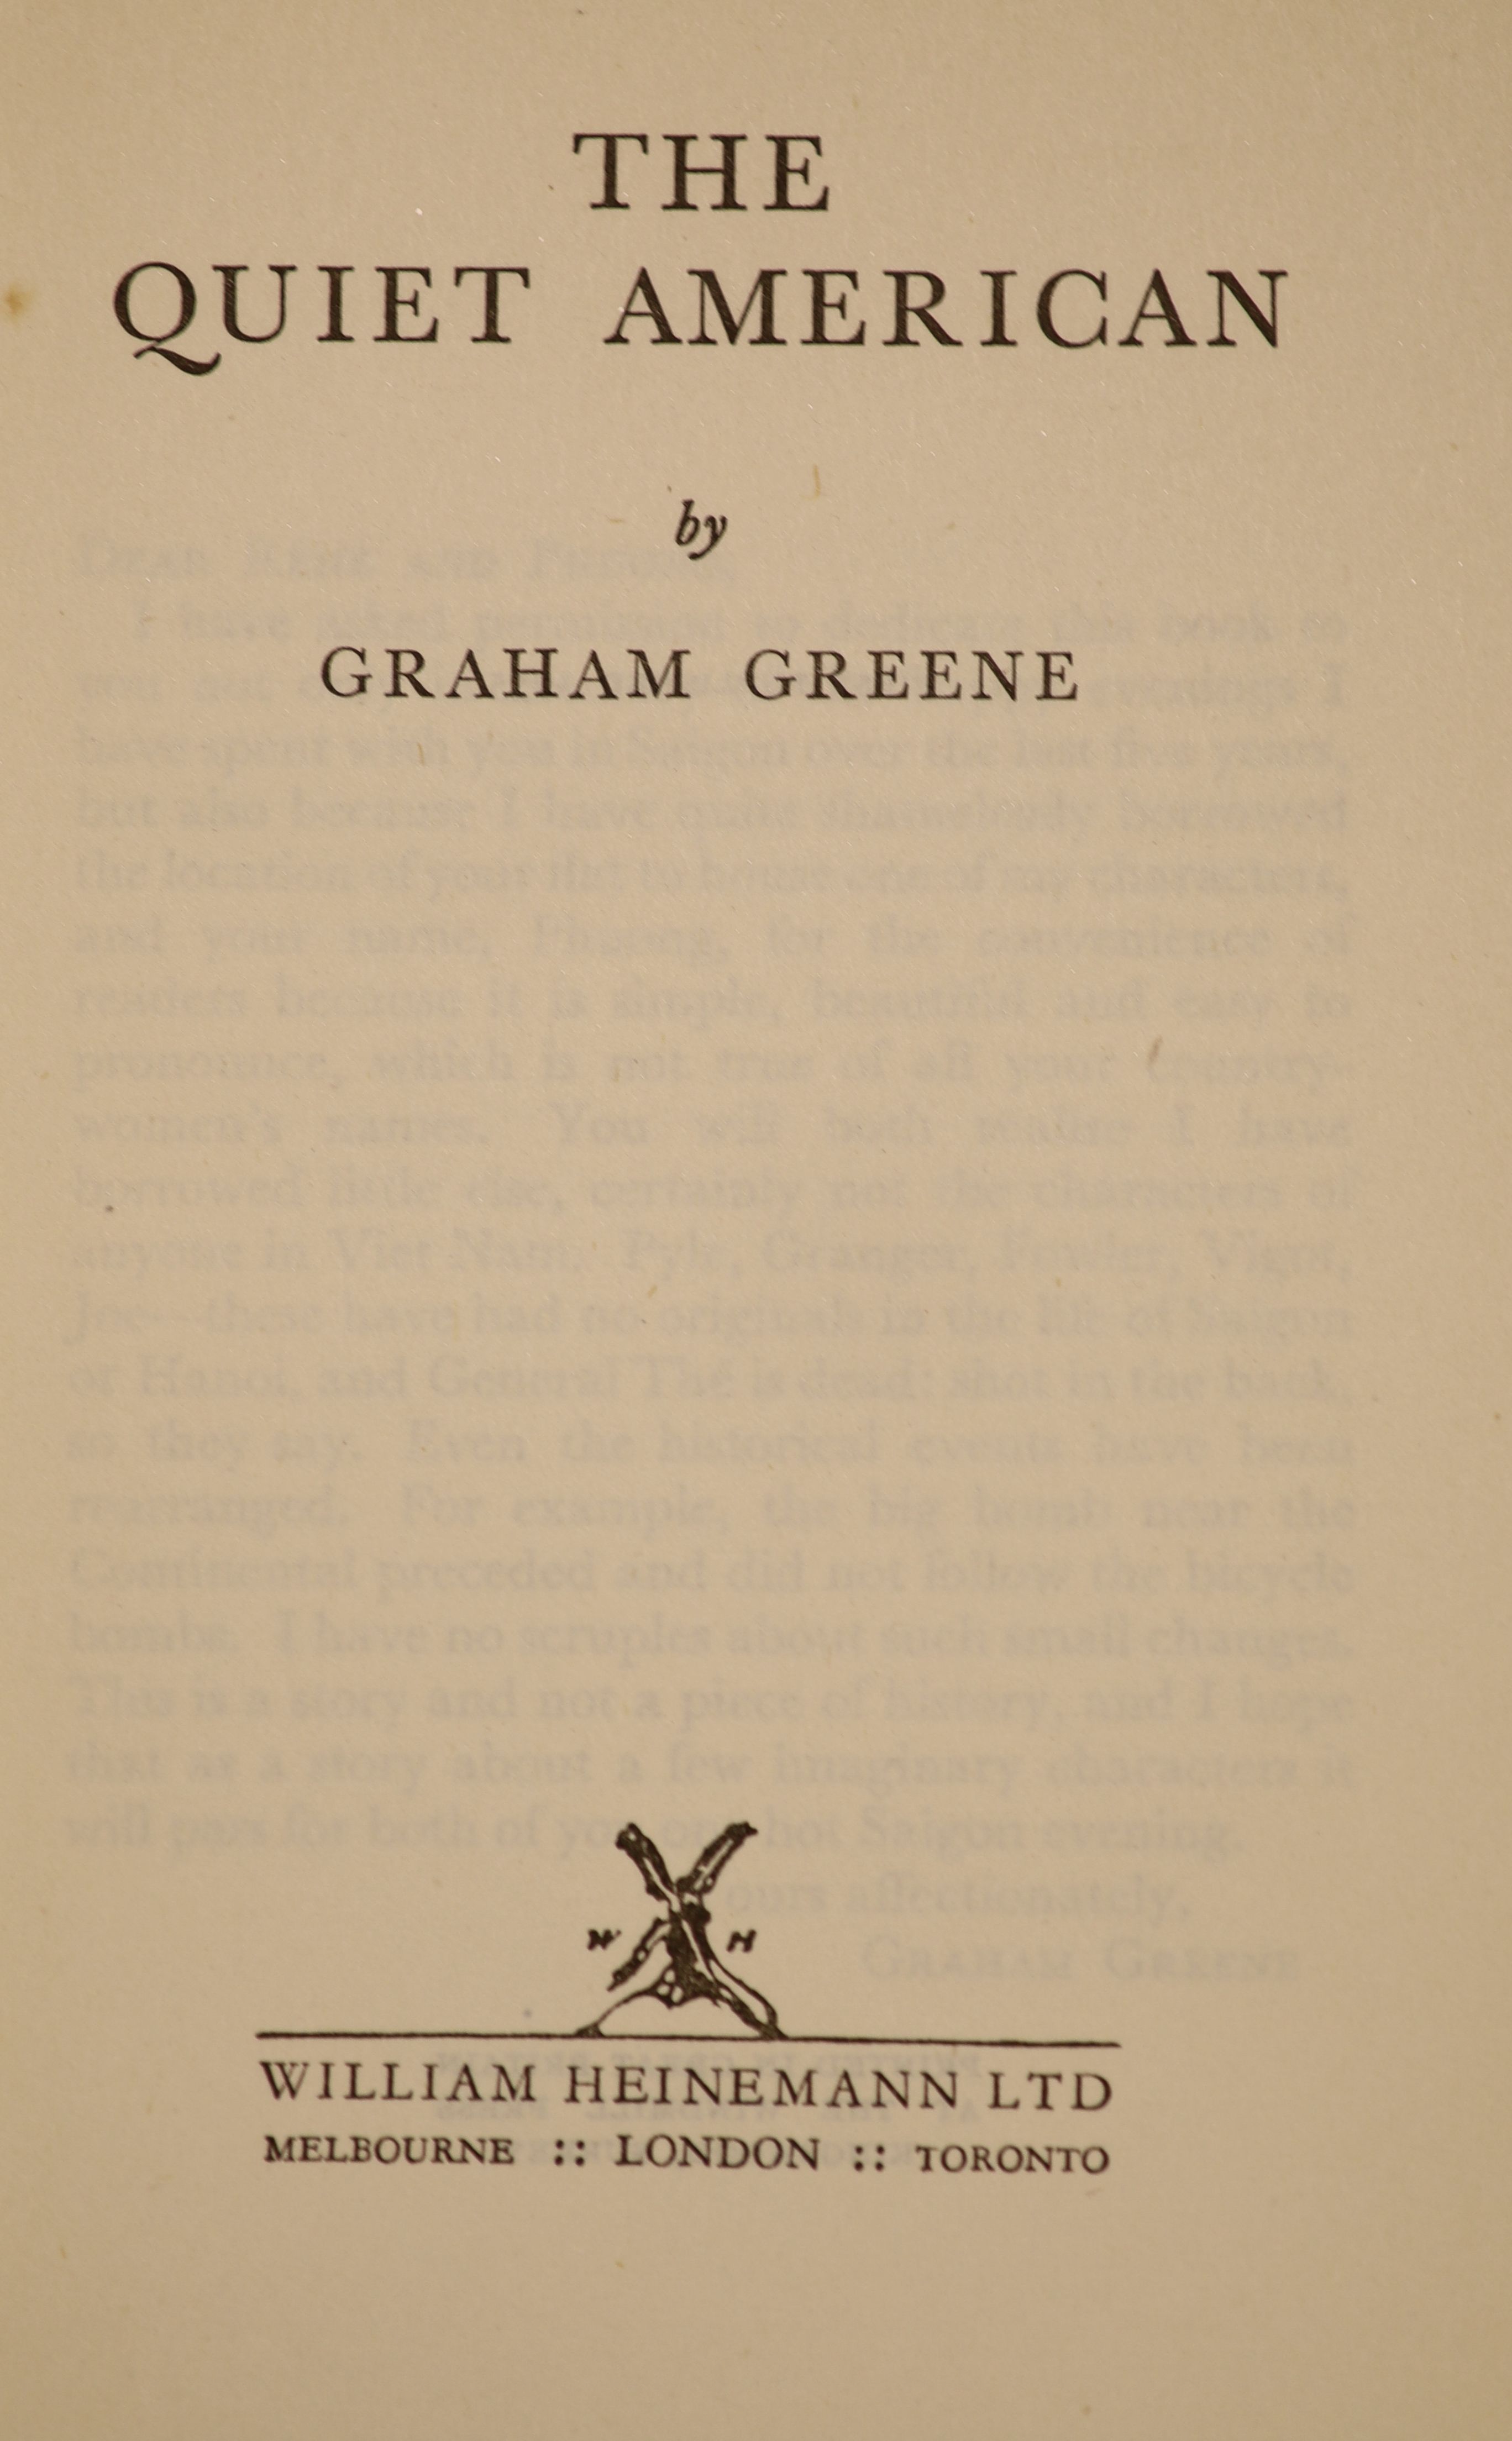 Greene, Graham - The Quiet American, 1st edition, original blue cloth, in unclipped d/j, chipped at head of spine, rear panel spotted, William Heinemann, London, 1955